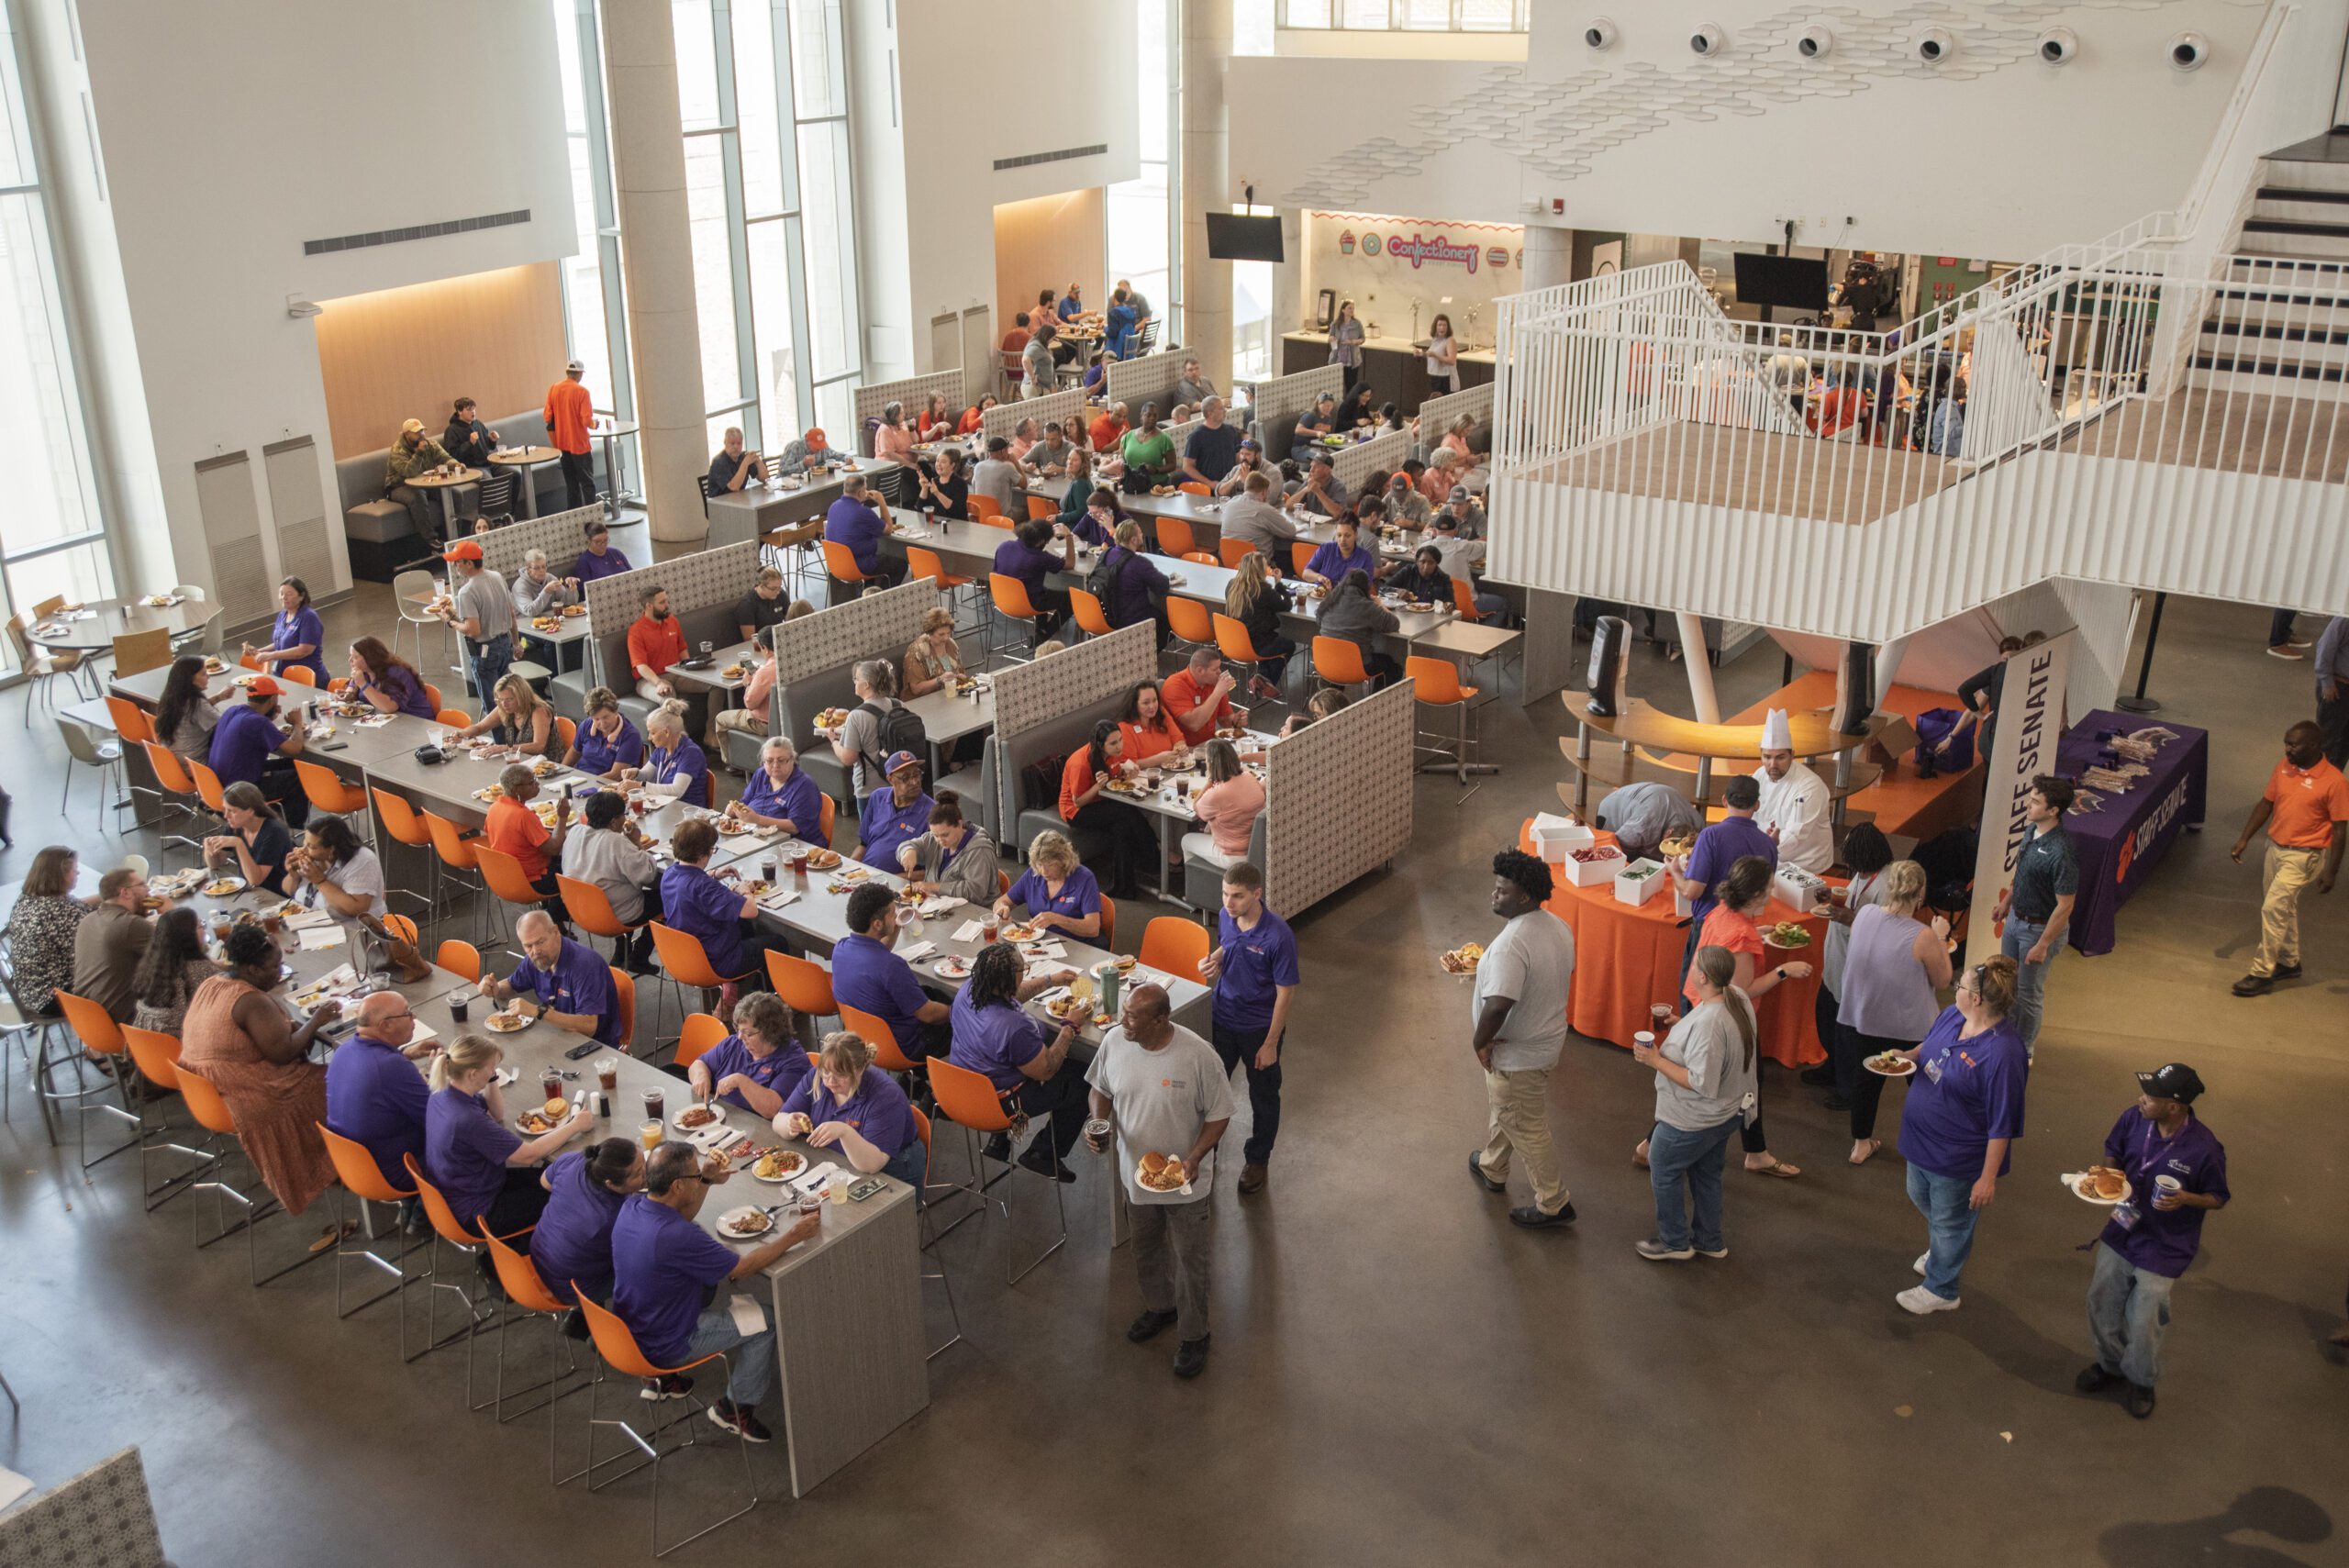 Arial view of people sitting around tables and walking around a dining hall with plates of food.